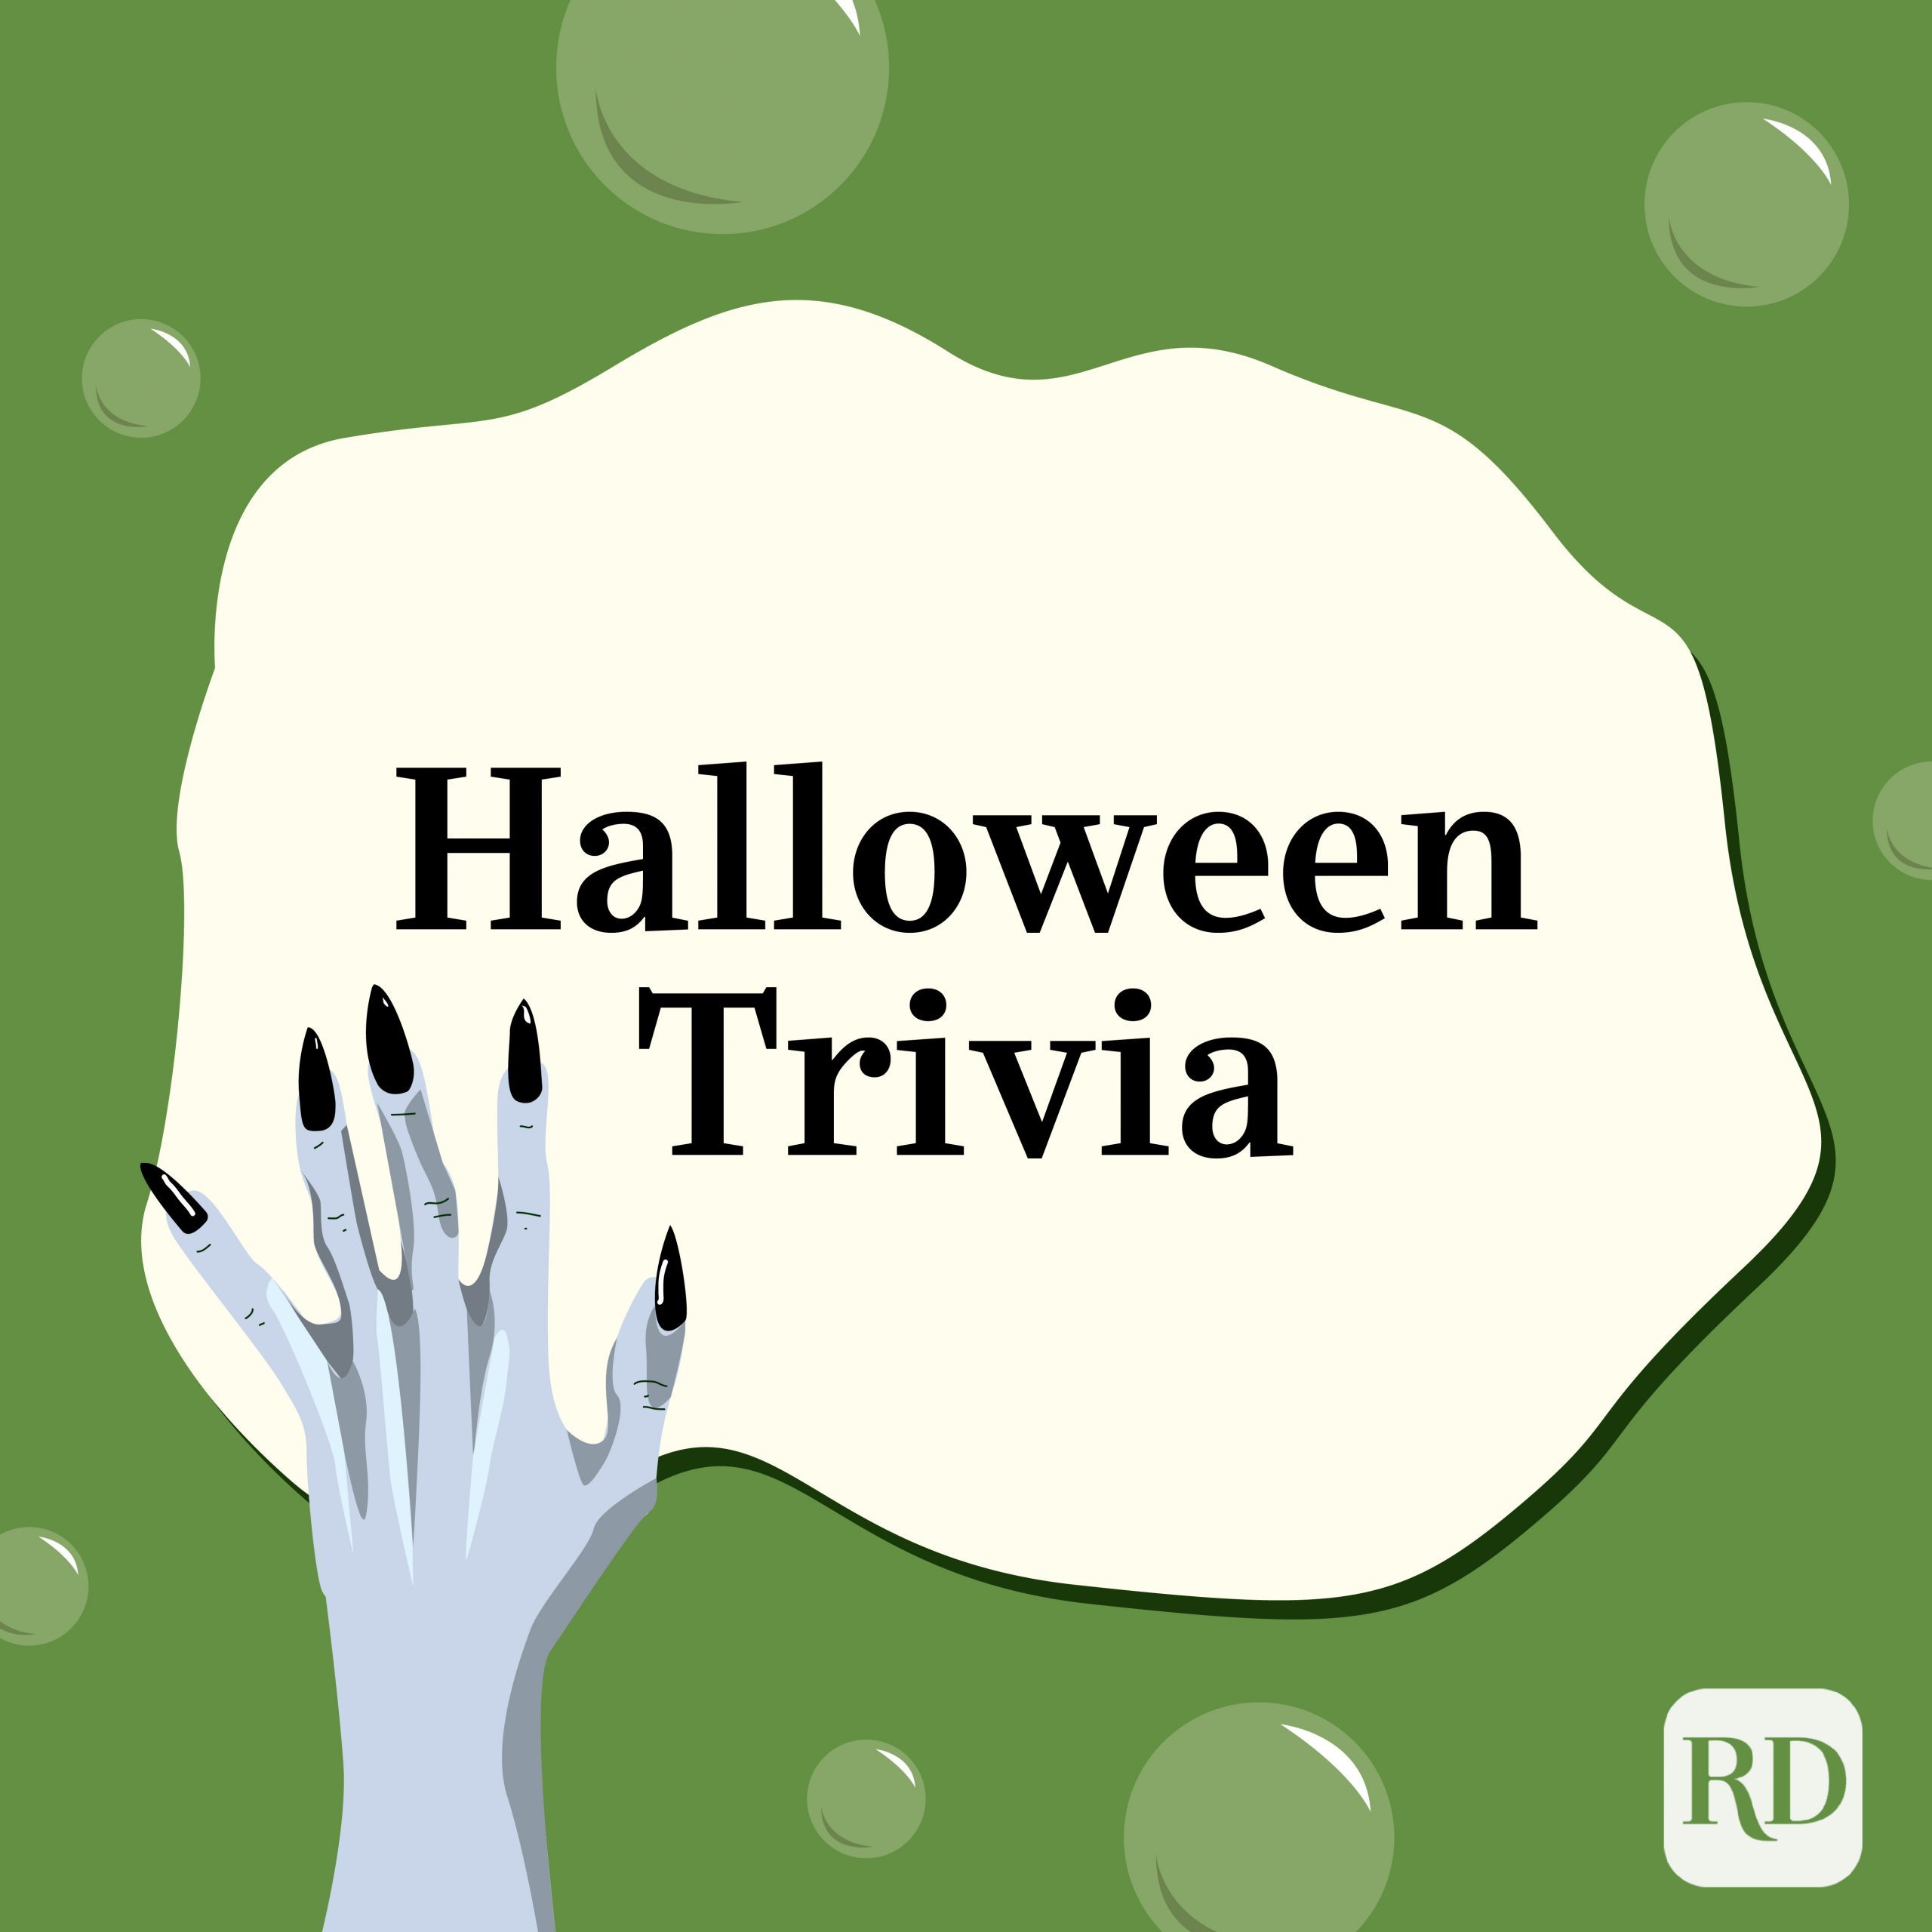 50 Halloween Trivia Questions With Answers Halloween Trivia